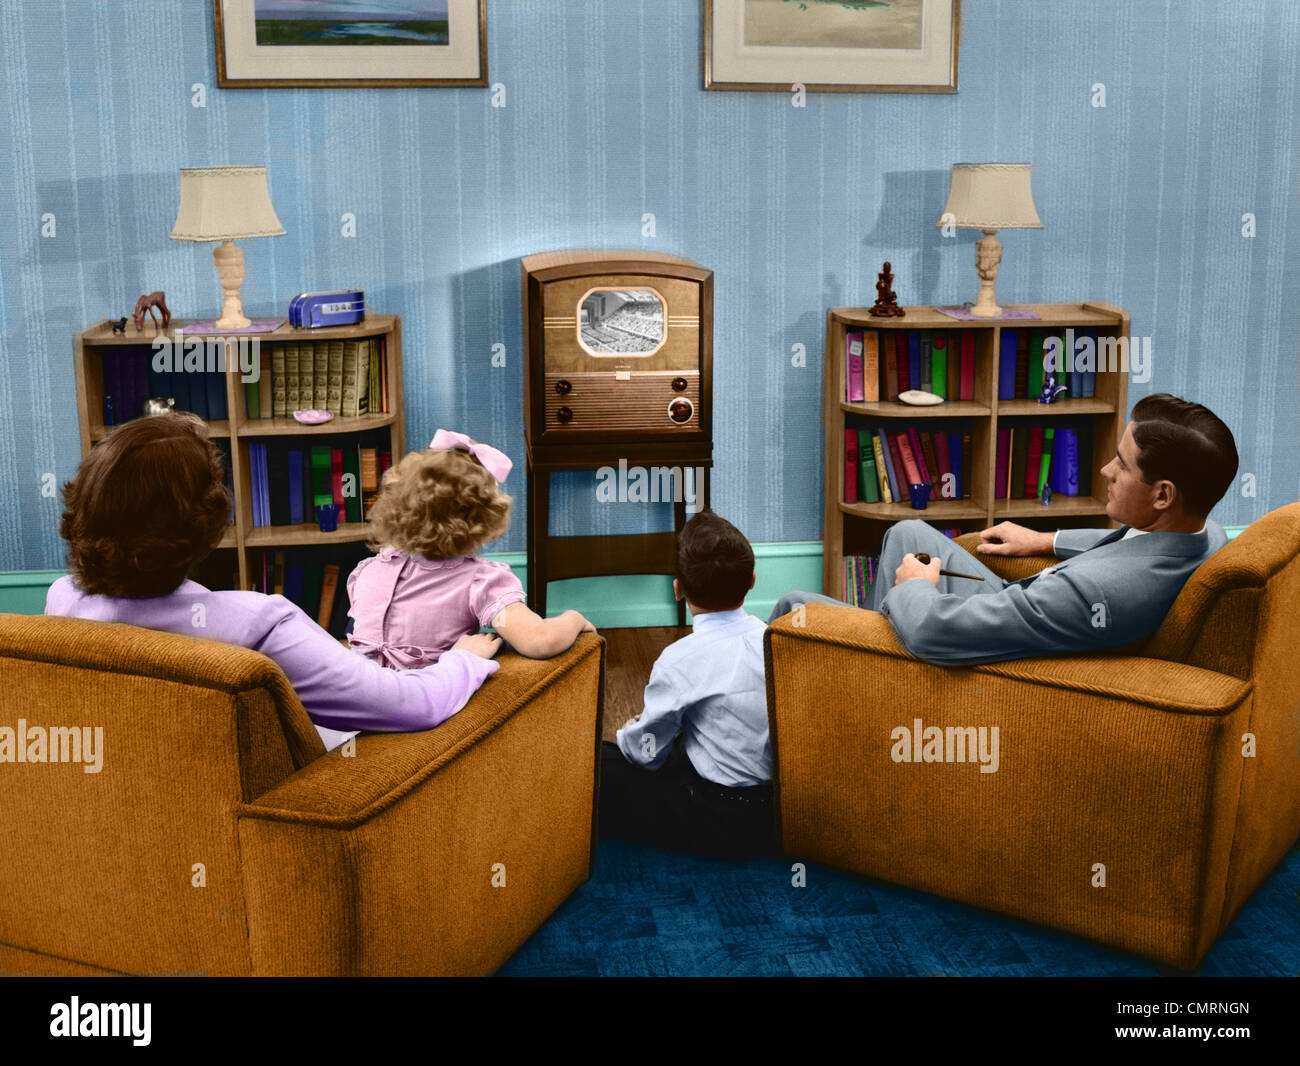 1940s 1950s FAMILY WATCHING TELEVISION IN LIVING ROOM Stock Photo